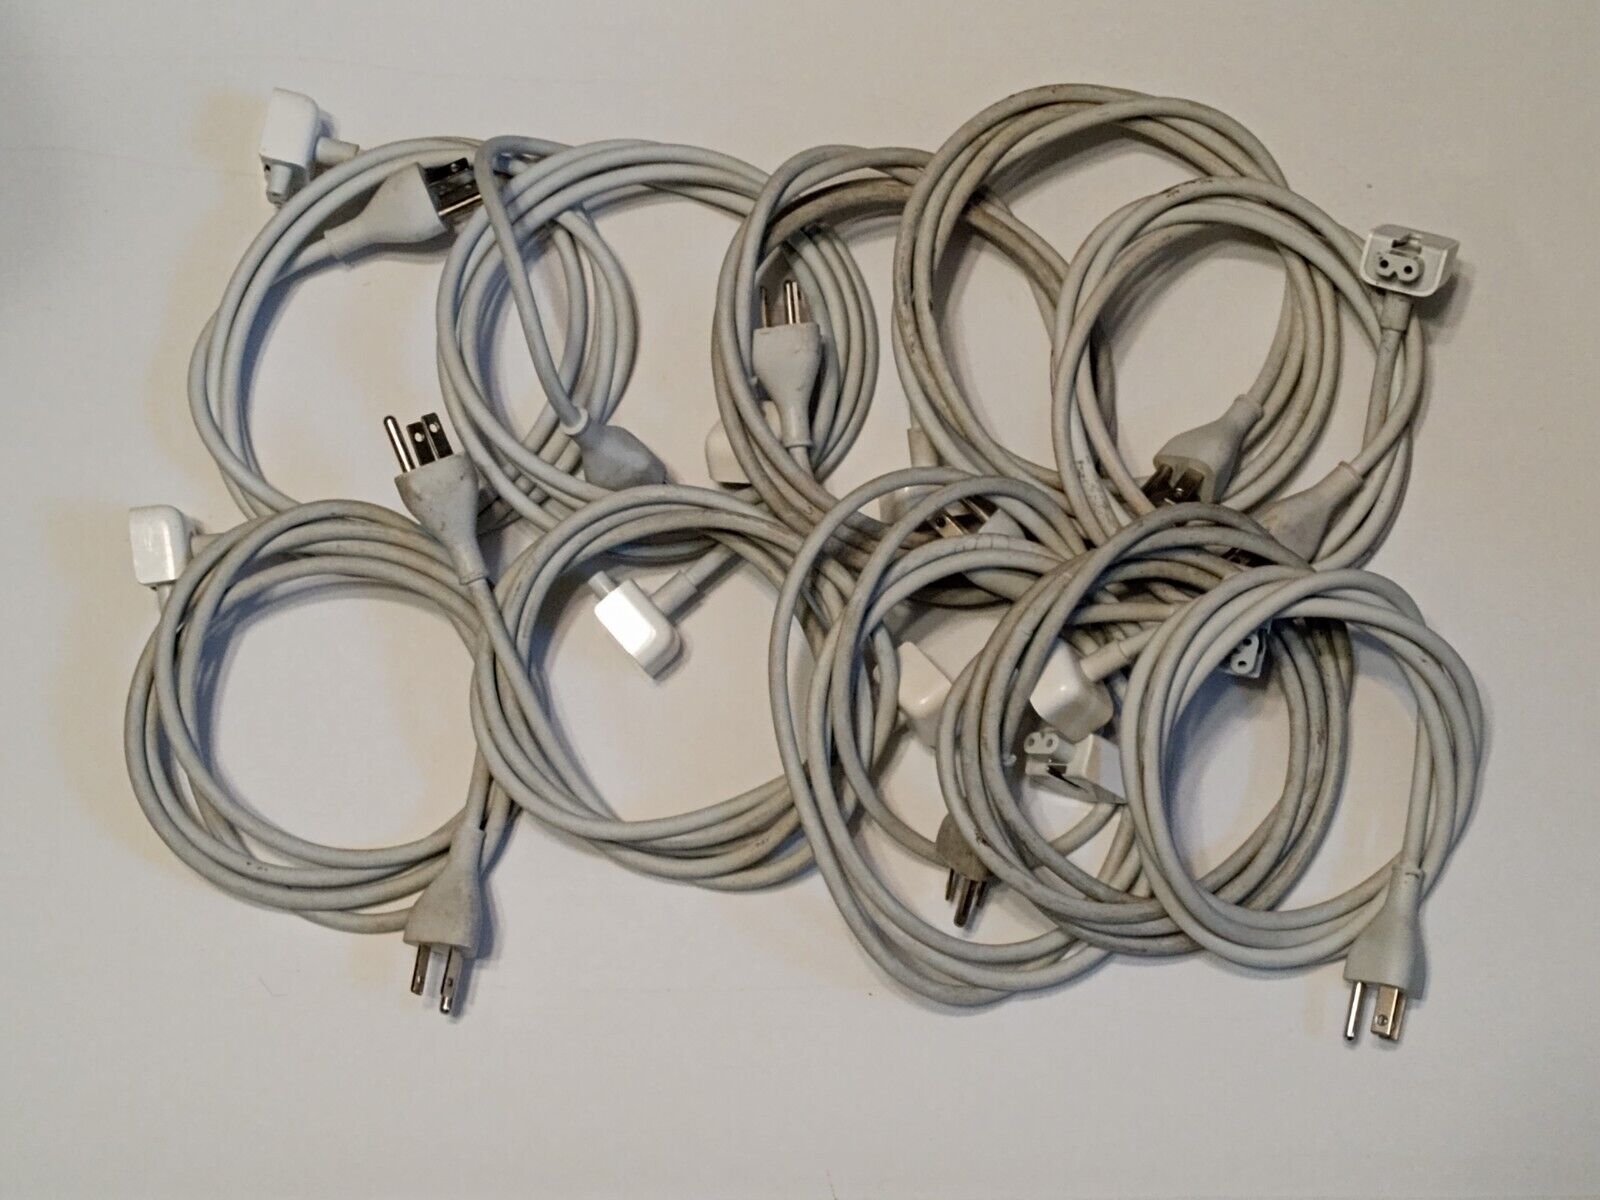 Lot of 10 pre-owned APPLE  Volex APC7H  2.5A 125V  6Ft  AC Power Cord cables